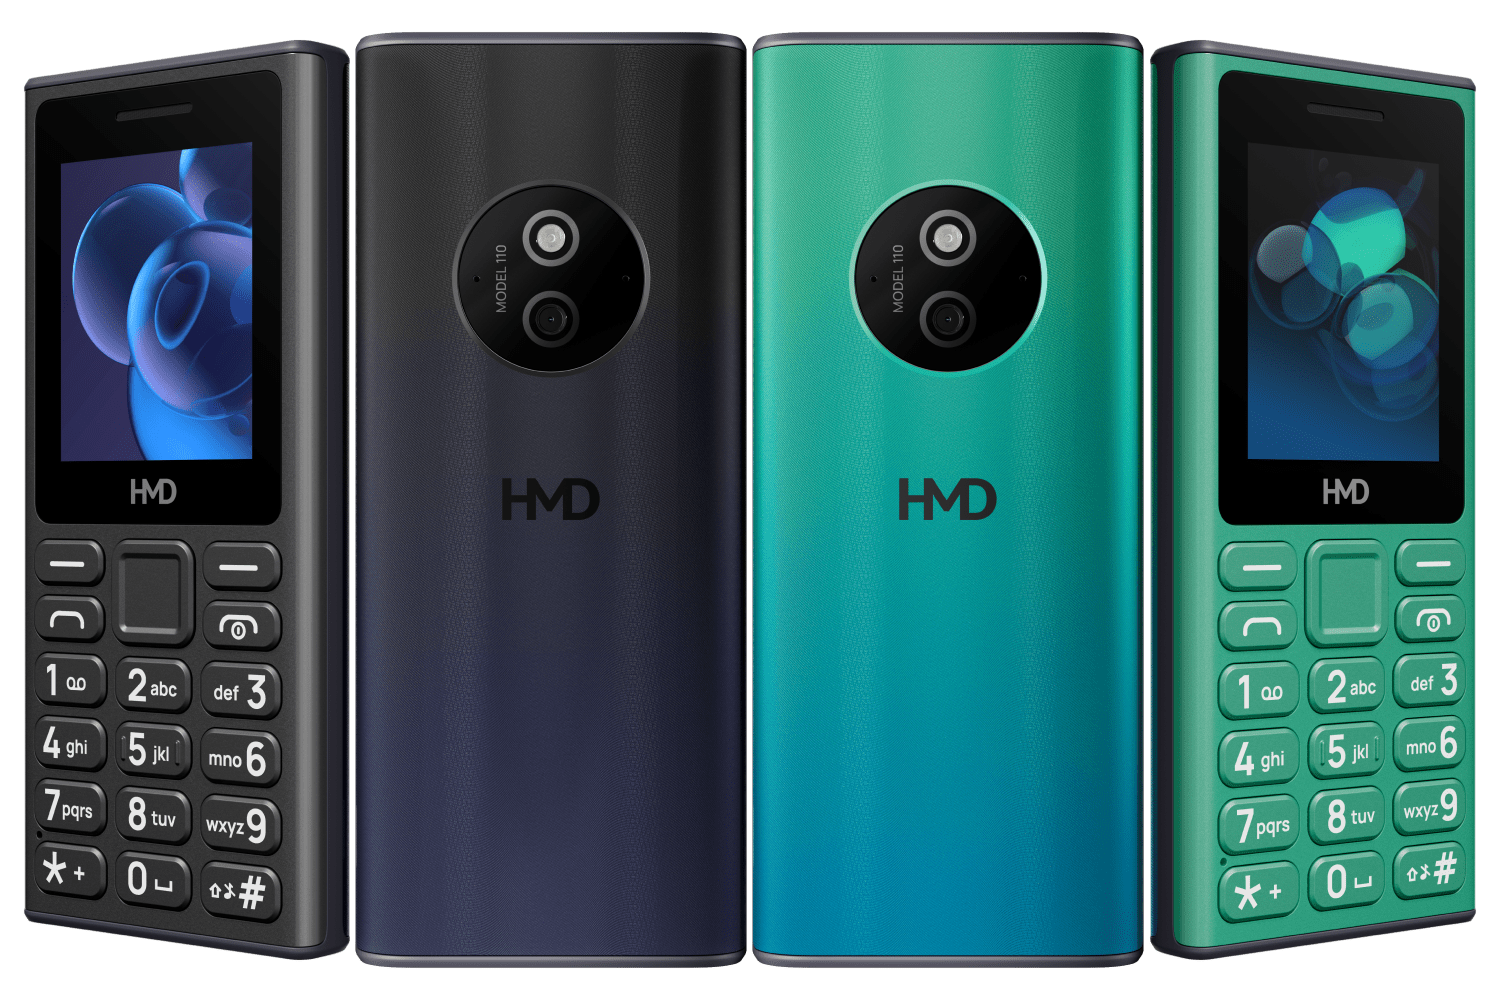 HMD Launches HMD 105 and HMD 110 Feature Phones in India